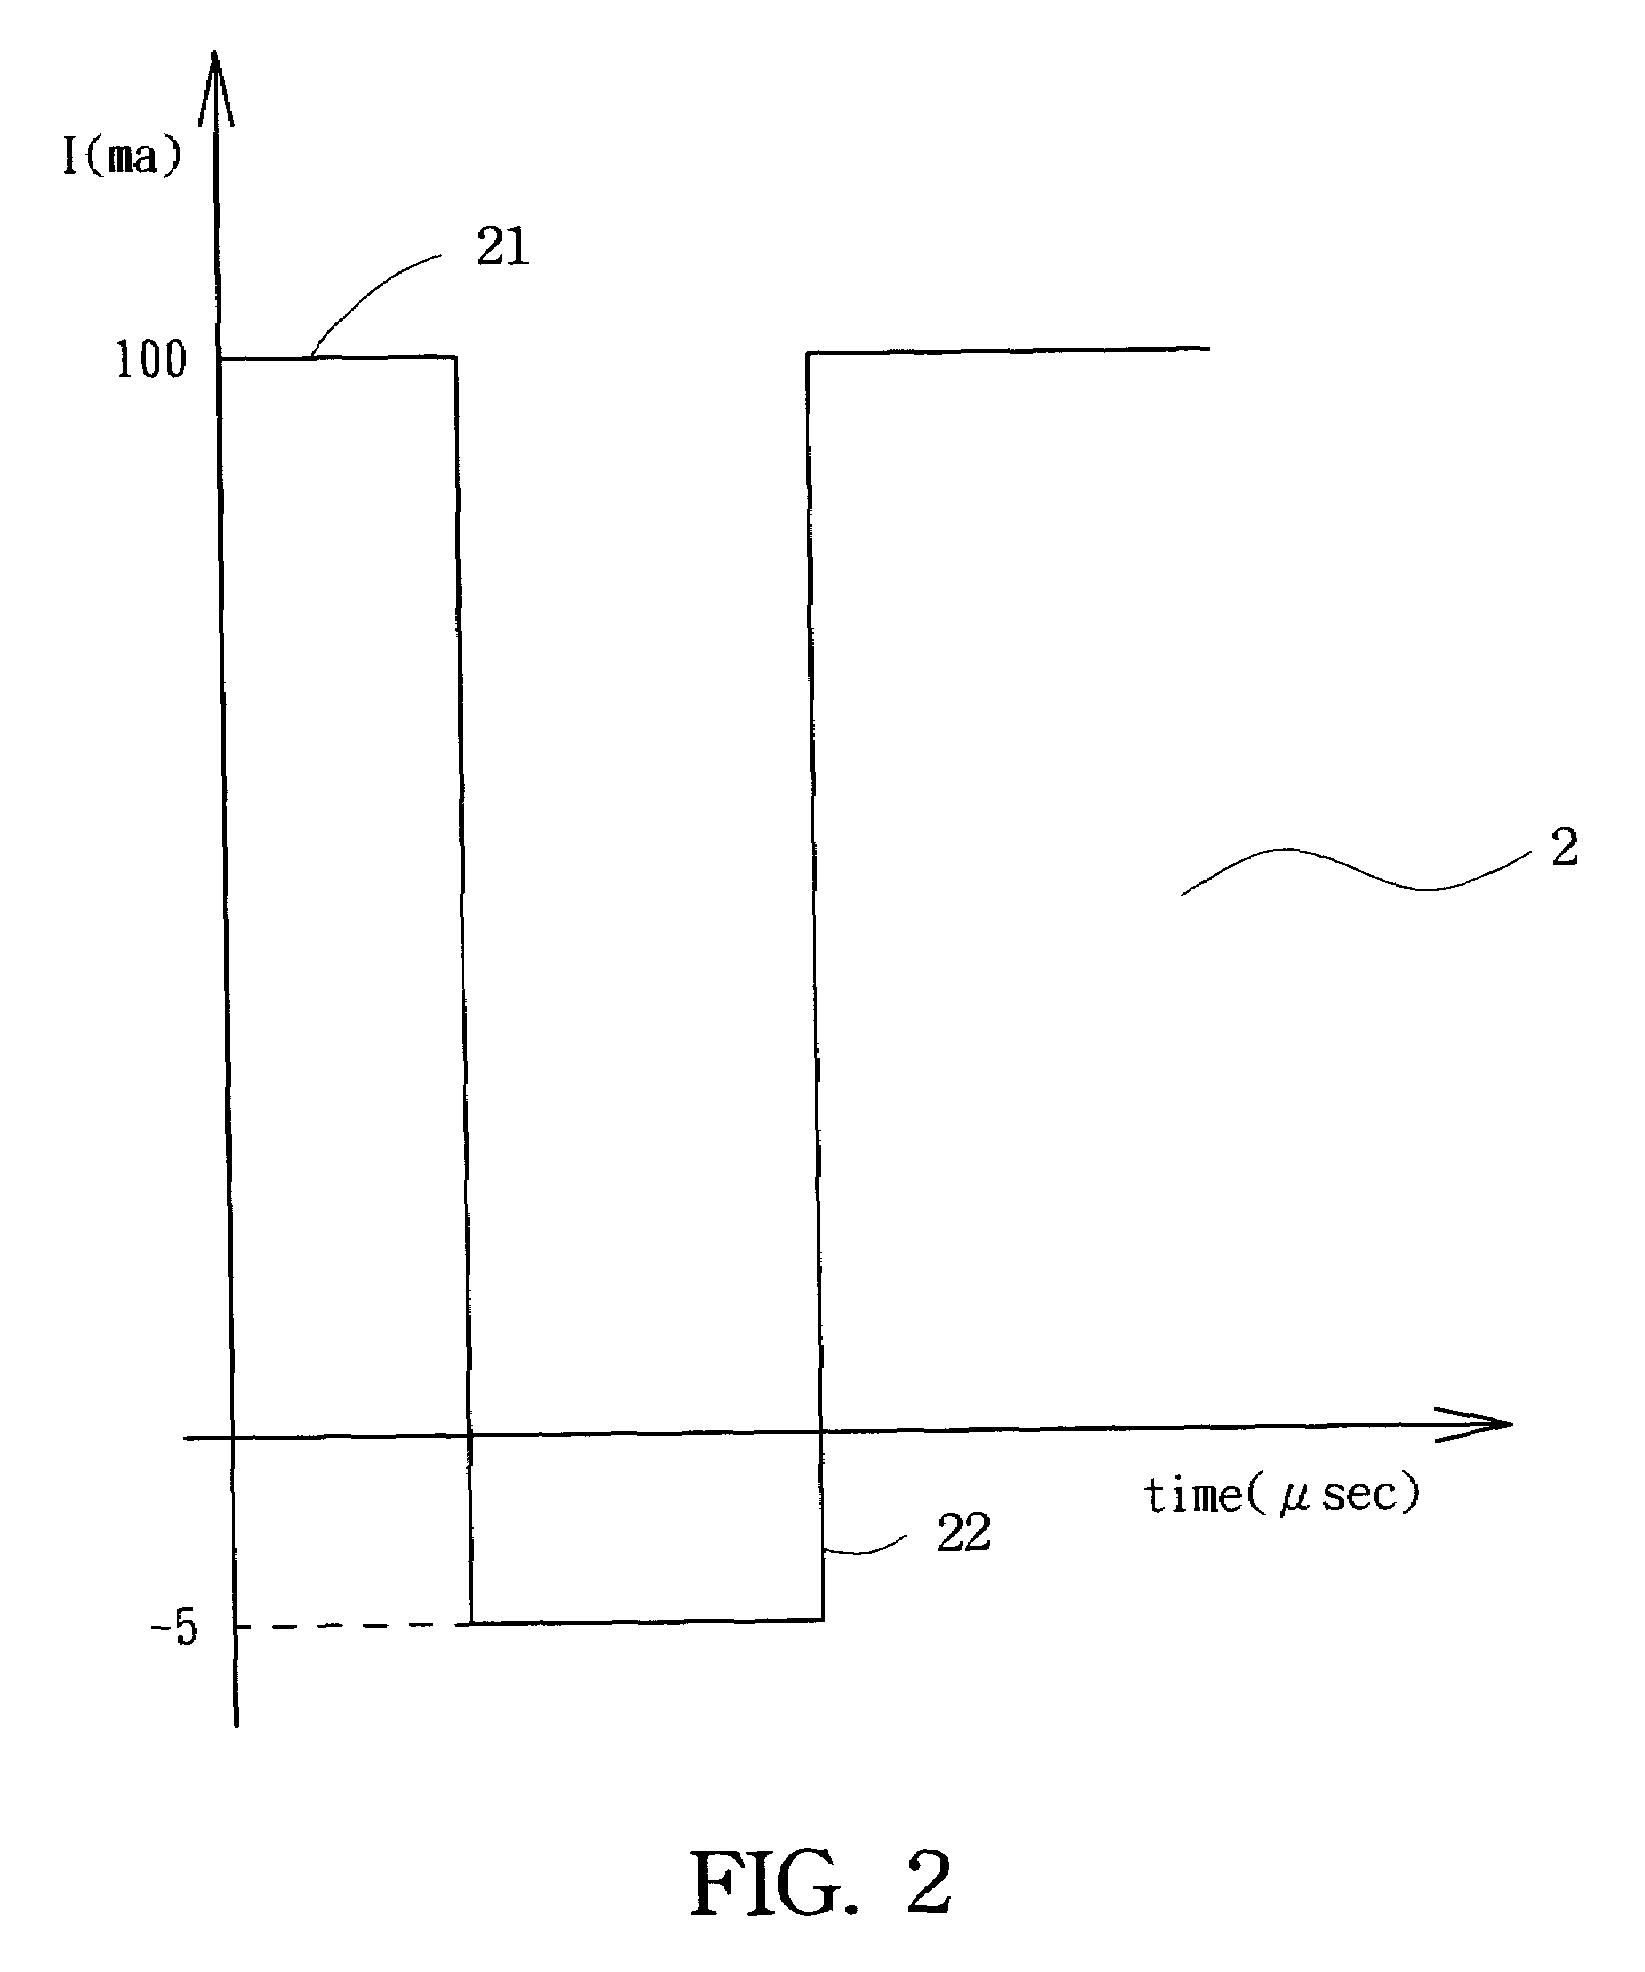 Method for analyzing the reliability of optoelectronic elements rapidly